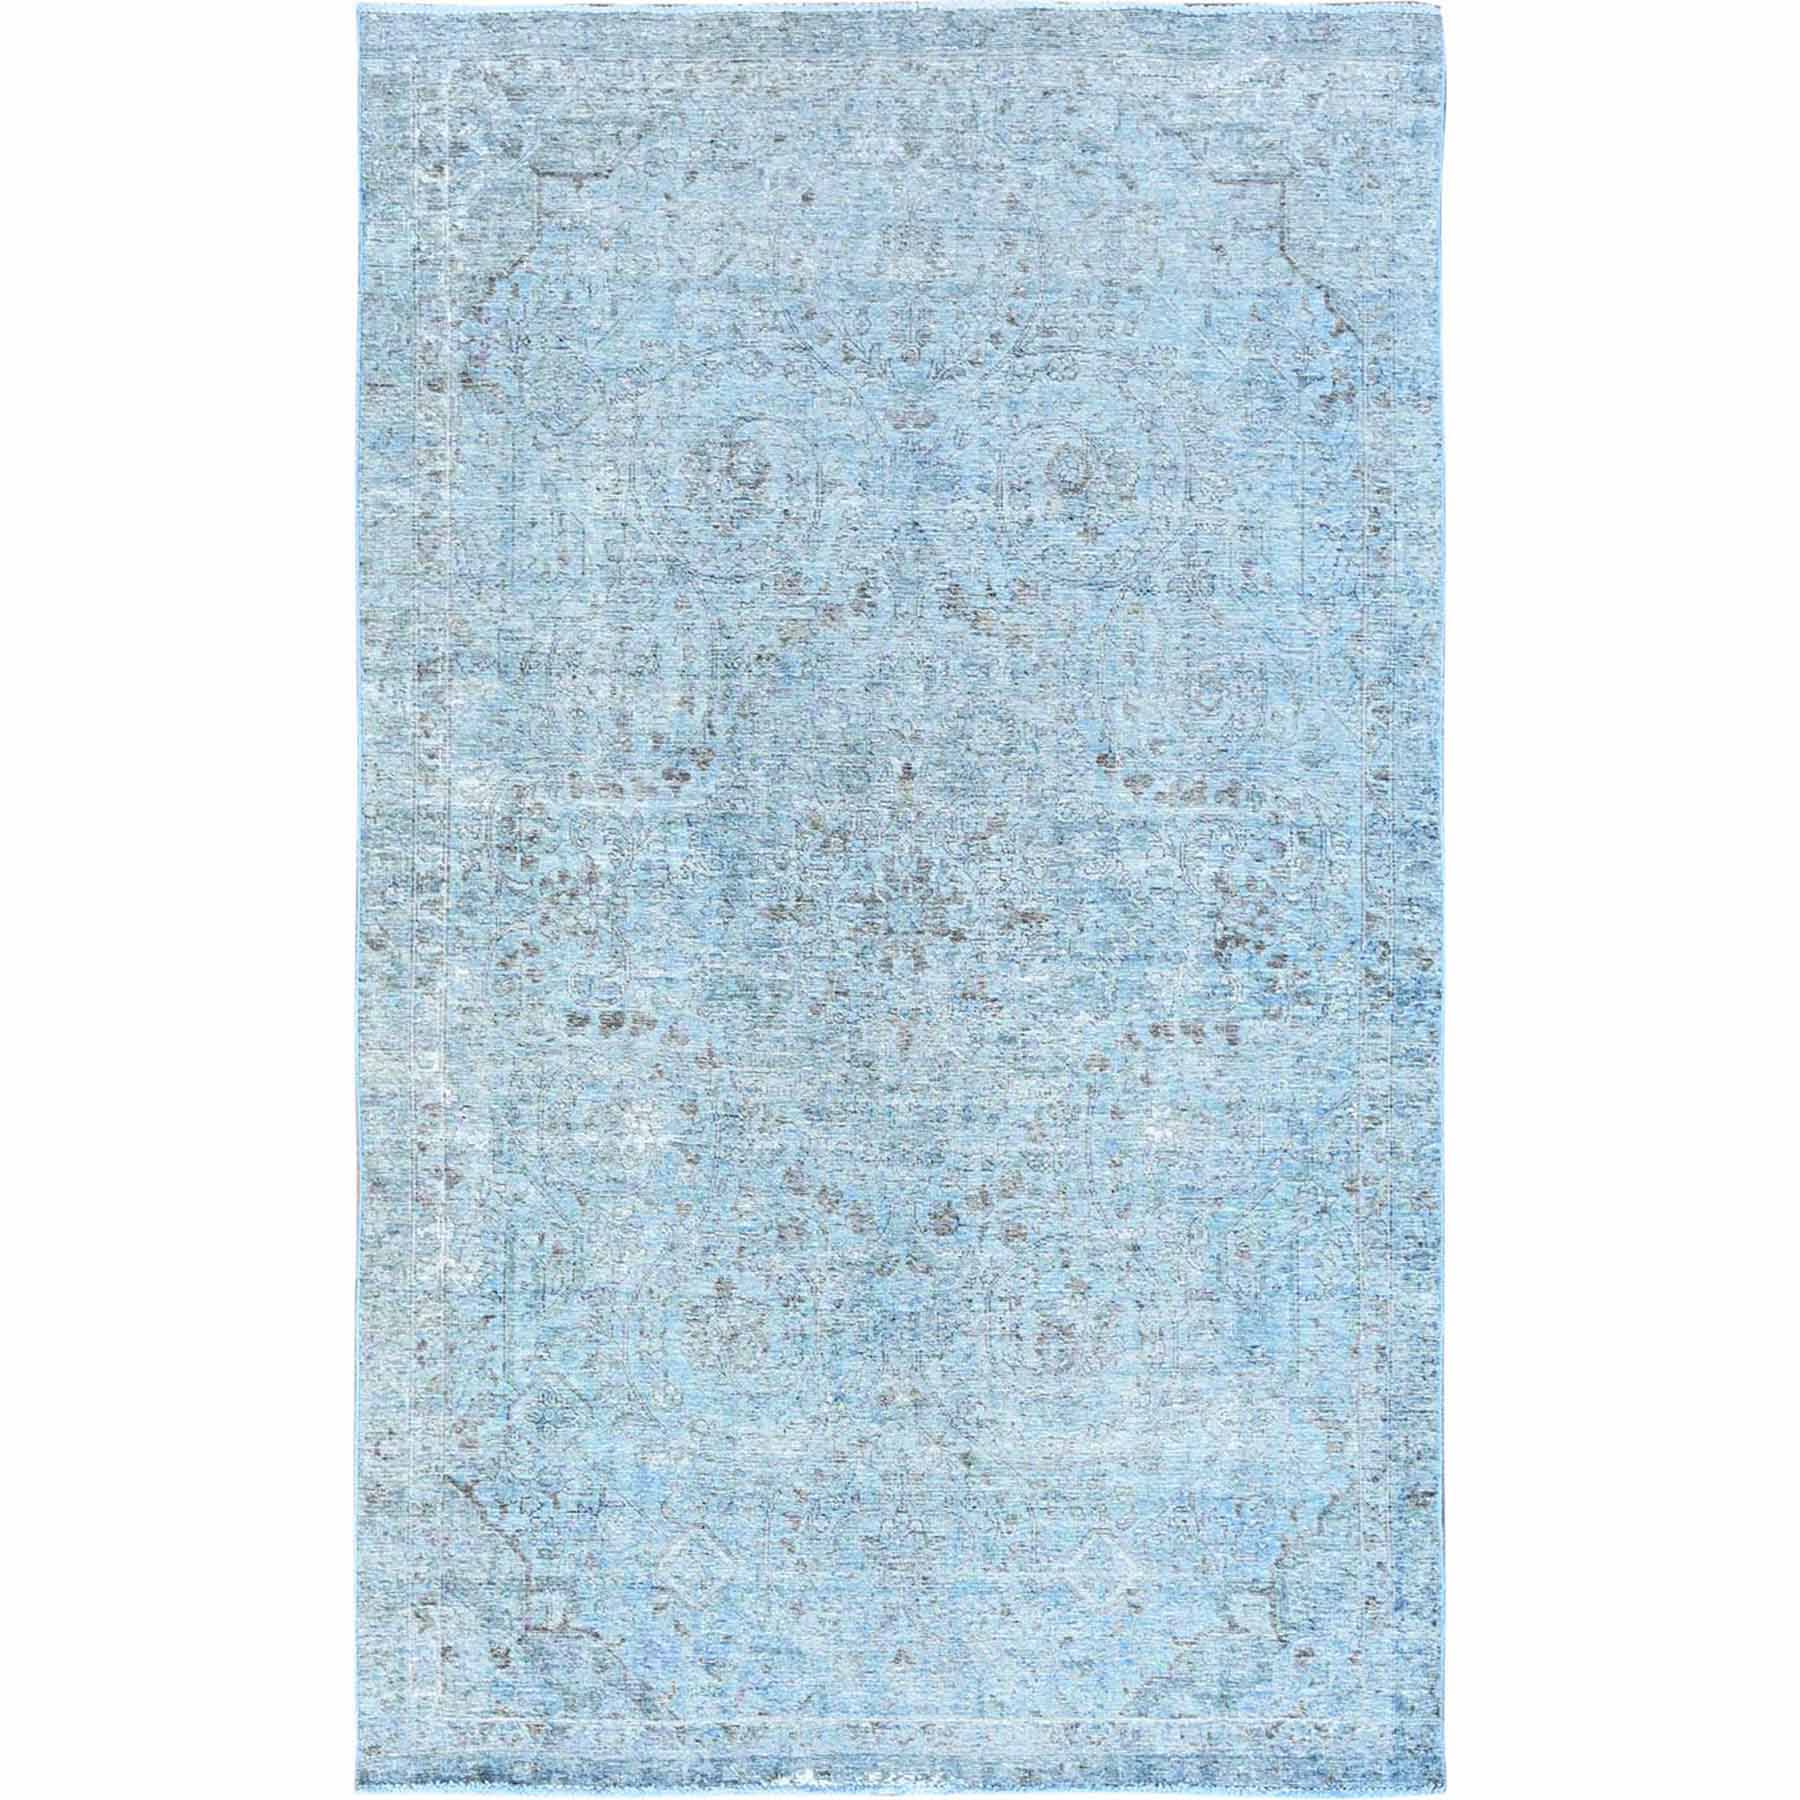 Overdyed-Vintage-Hand-Woven-Rug-427000